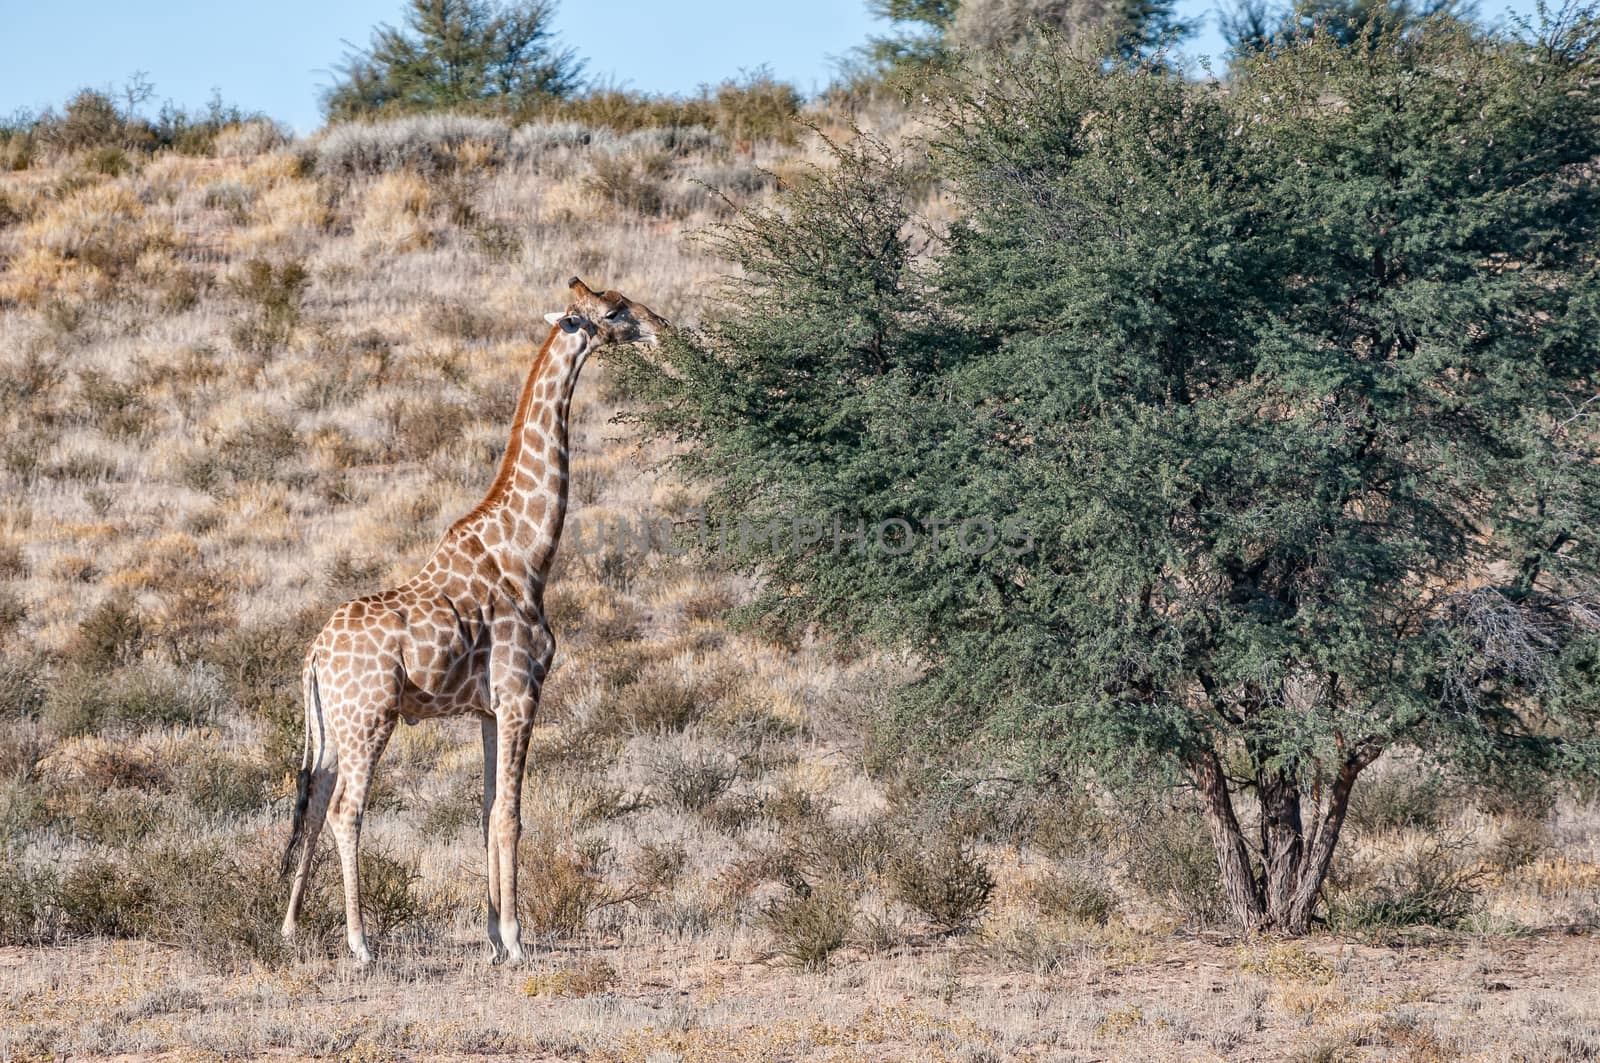 A South African giraffe browsing on a tree in the arid Kgalagadi